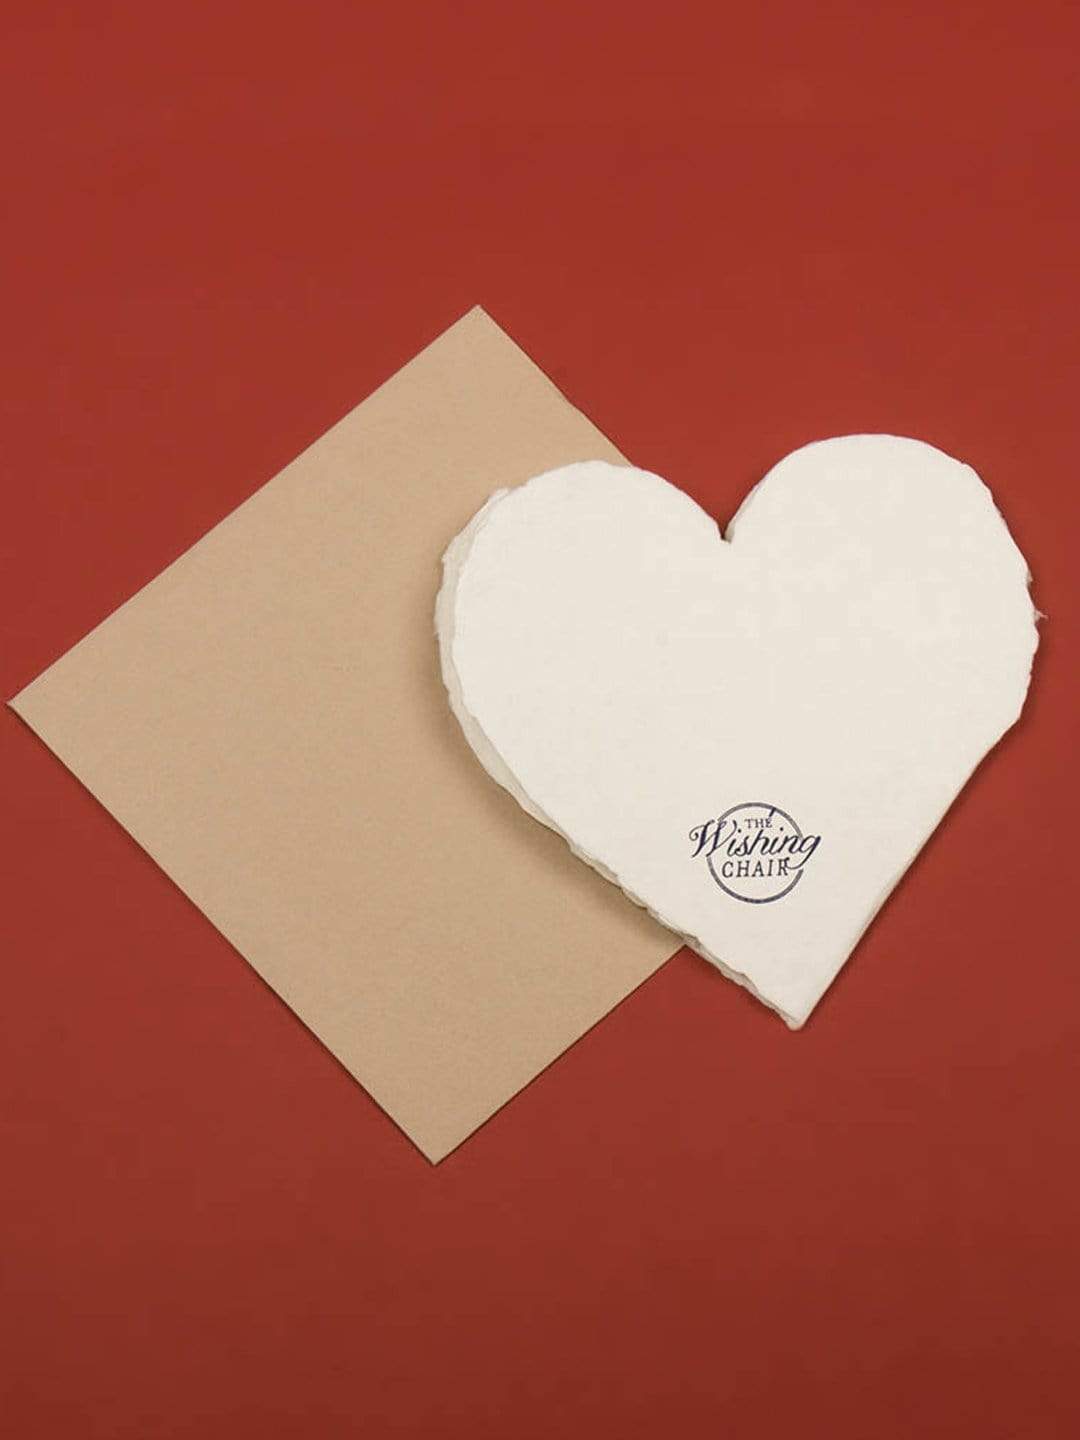 Heart Shaped Card - Ee CummingsMaterial: Made of deckle-edged handmade paper
Dimensions: 6"X6"

Do not bend, Keep away from moisture

 Heart Shaped Card - Ee CummingsThe Wishing Chair